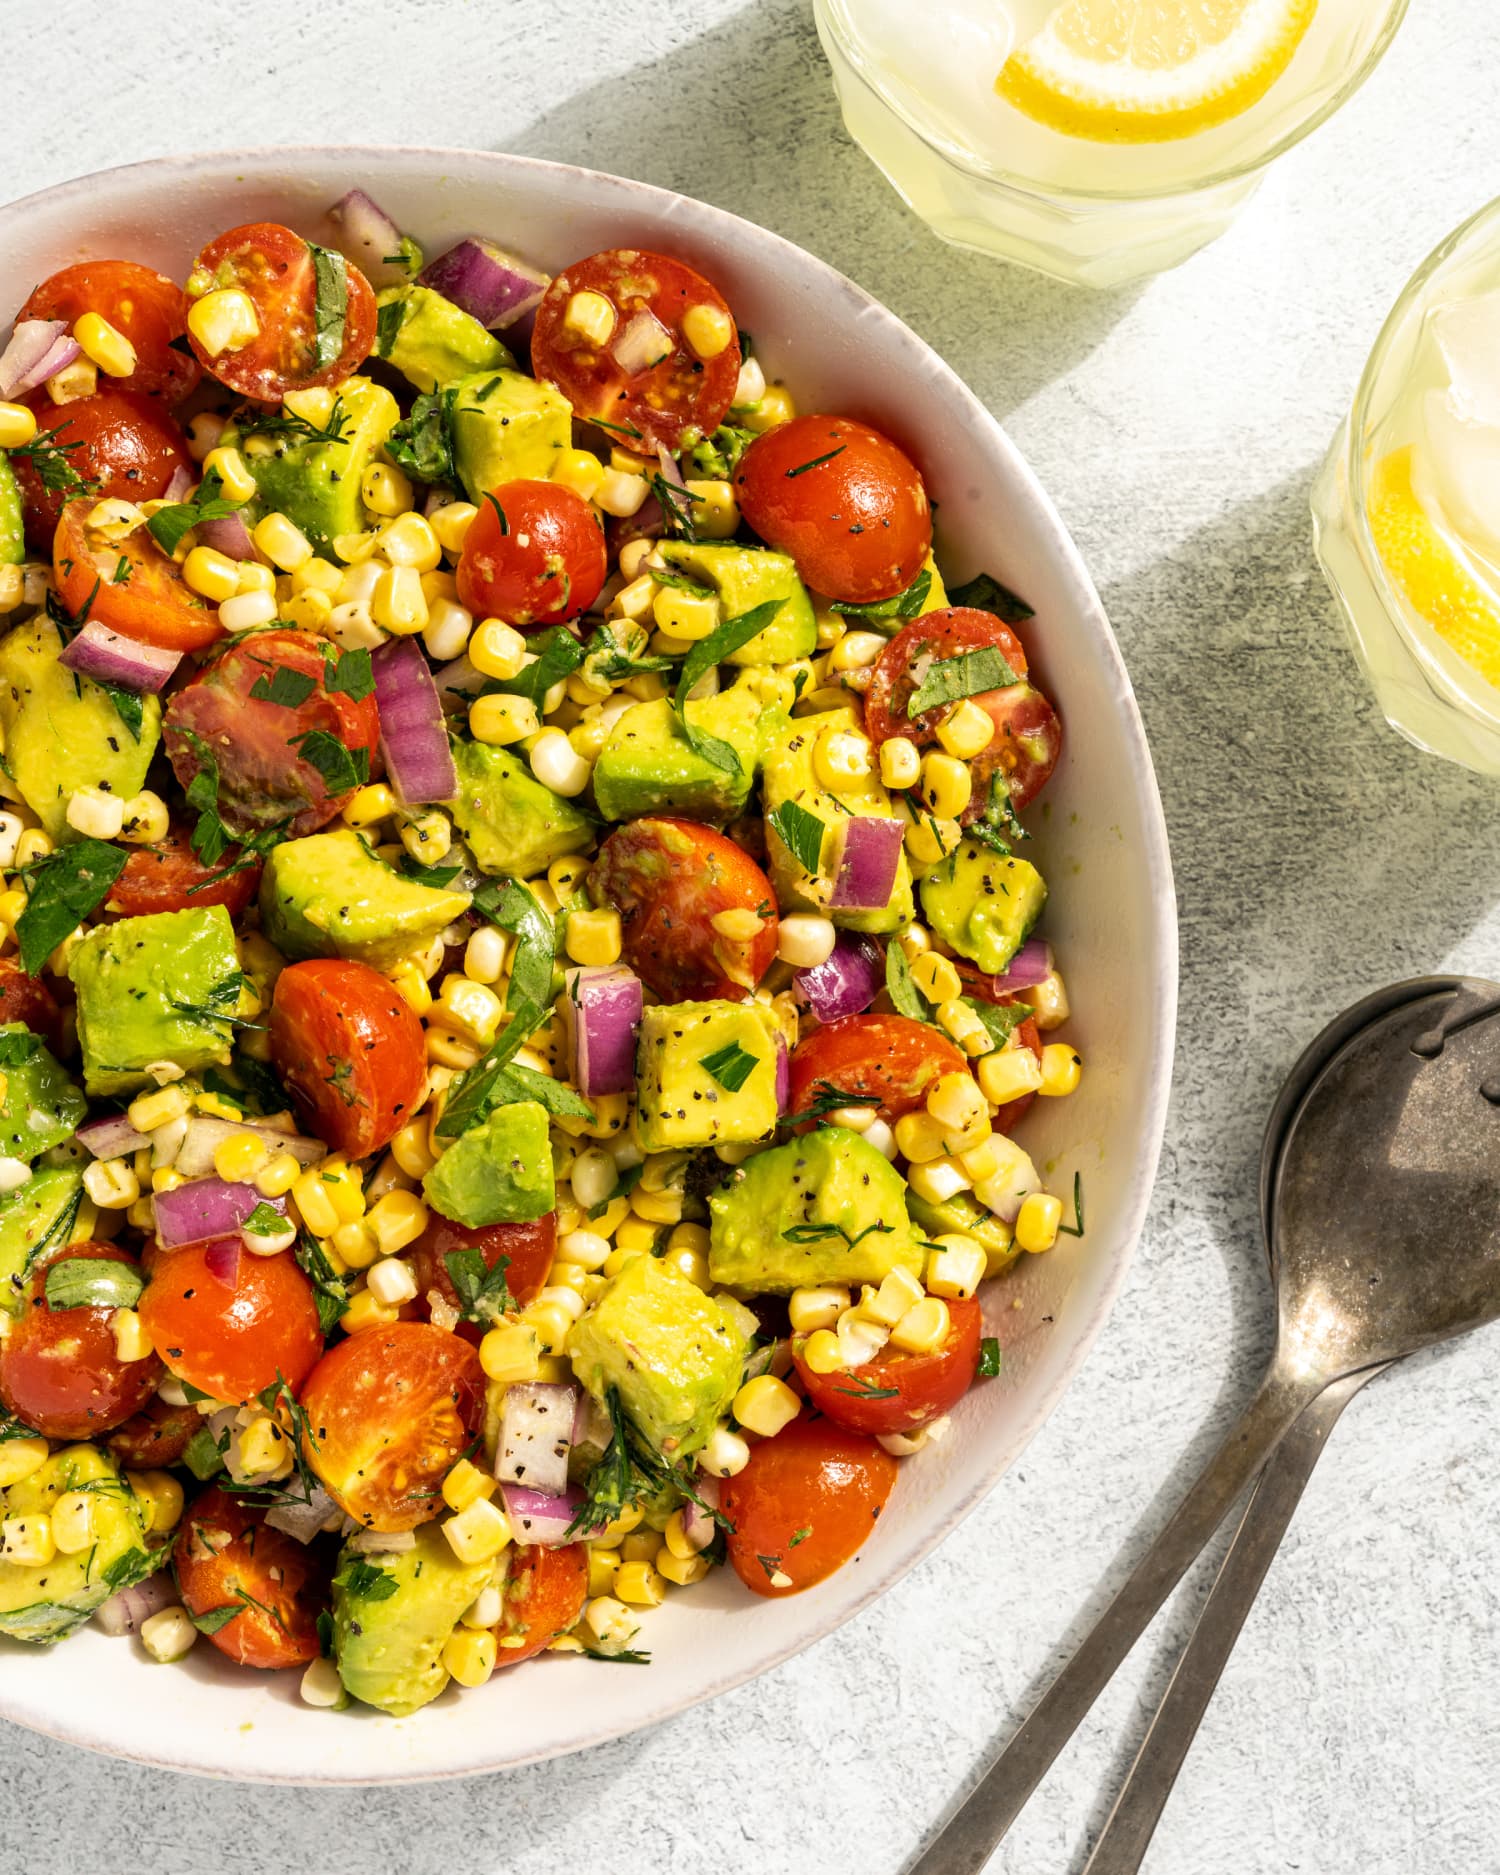 This Avocado-Corn Salad Is the Side of Summer